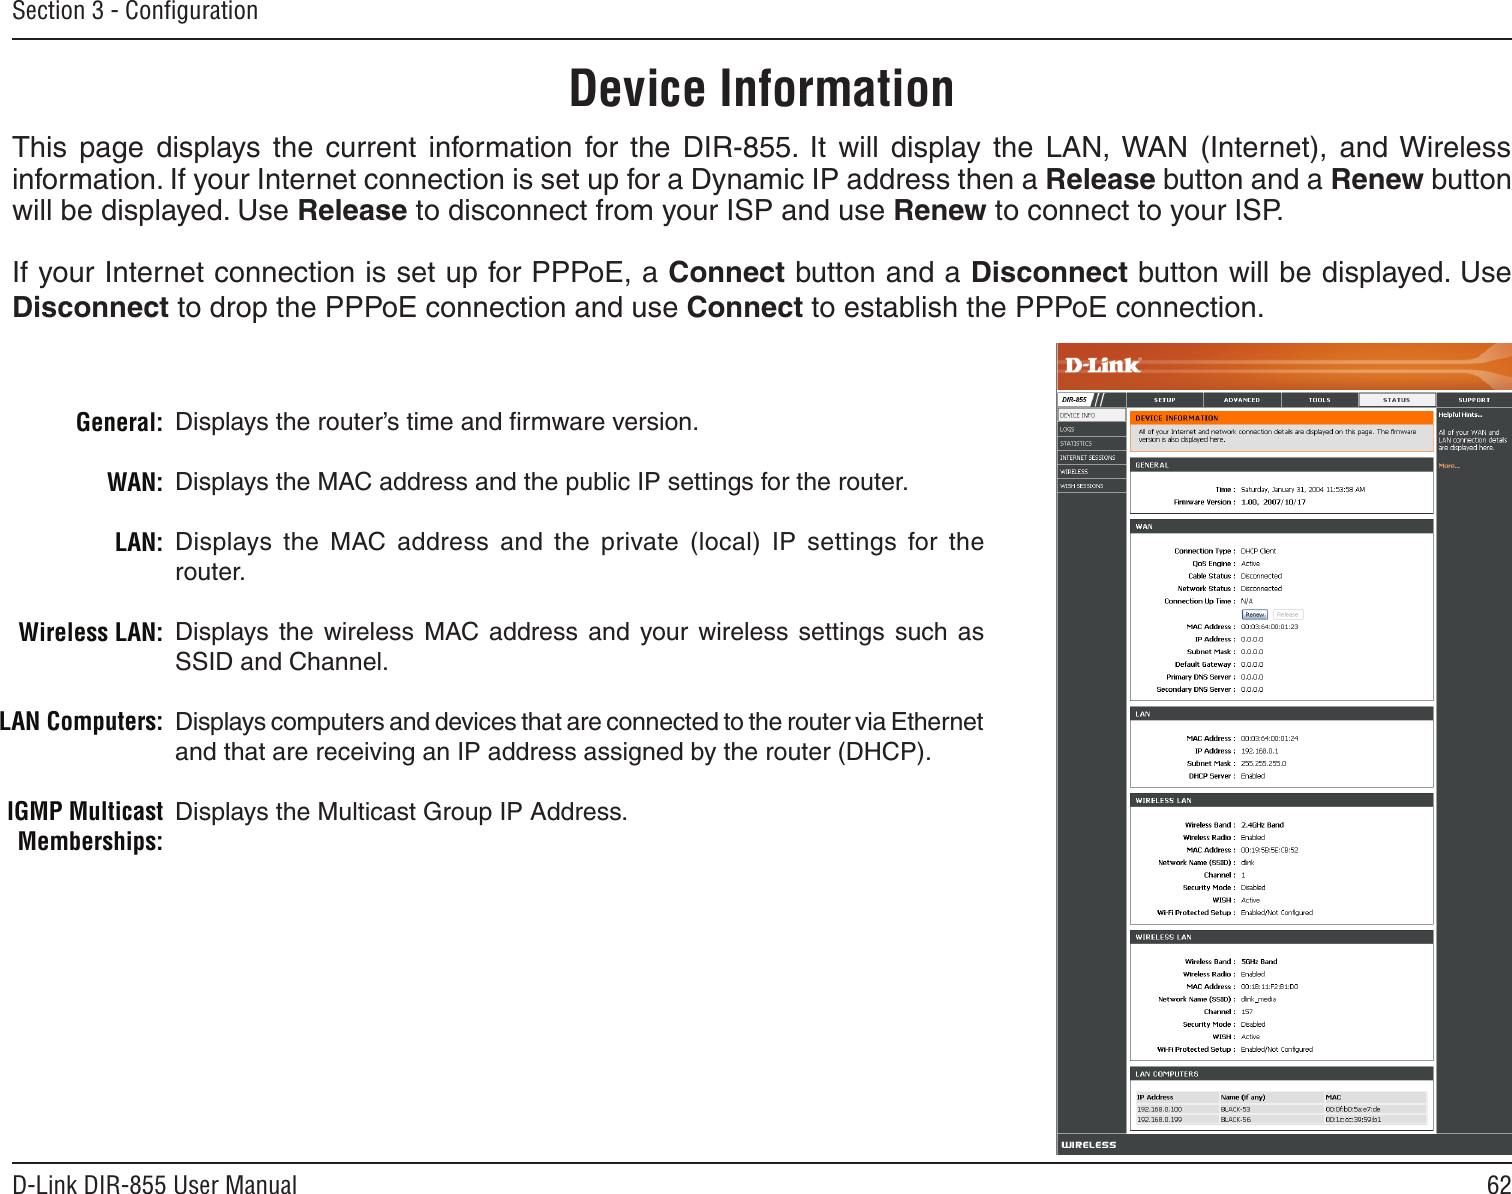 62D-Link DIR-855 User ManualSection 3 - ConﬁgurationThis  page  displays  the  current  information  for  the  DIR-855.  It  will  display  the  LAN, WAN  (Internet),  and Wireless information. If your Internet connection is set up for a Dynamic IP address then a Release button and a Renew button will be displayed. Use Release to disconnect from your ISP and use Renew to connect to your ISP. If your Internet connection is set up for PPPoE, a Connect button and a Disconnect button will be displayed. Use Disconnect to drop the PPPoE connection and use Connect to establish the PPPoE connection.Displays the router’s time and ﬁrmware version.Displays the MAC address and the public IP settings for the router.Displays  the  MAC  address  and  the  private  (local)  IP  settings  for  the router.Displays  the  wireless  MAC address  and  your  wireless  settings  such  as SSID and Channel.Displays computers and devices that are connected to the router via Ethernet and that are receiving an IP address assigned by the router (DHCP). Displays the Multicast Group IP Address.General:WAN:LAN:Wireless LAN:LAN Computers:IGMP Multicast Memberships:Device Information